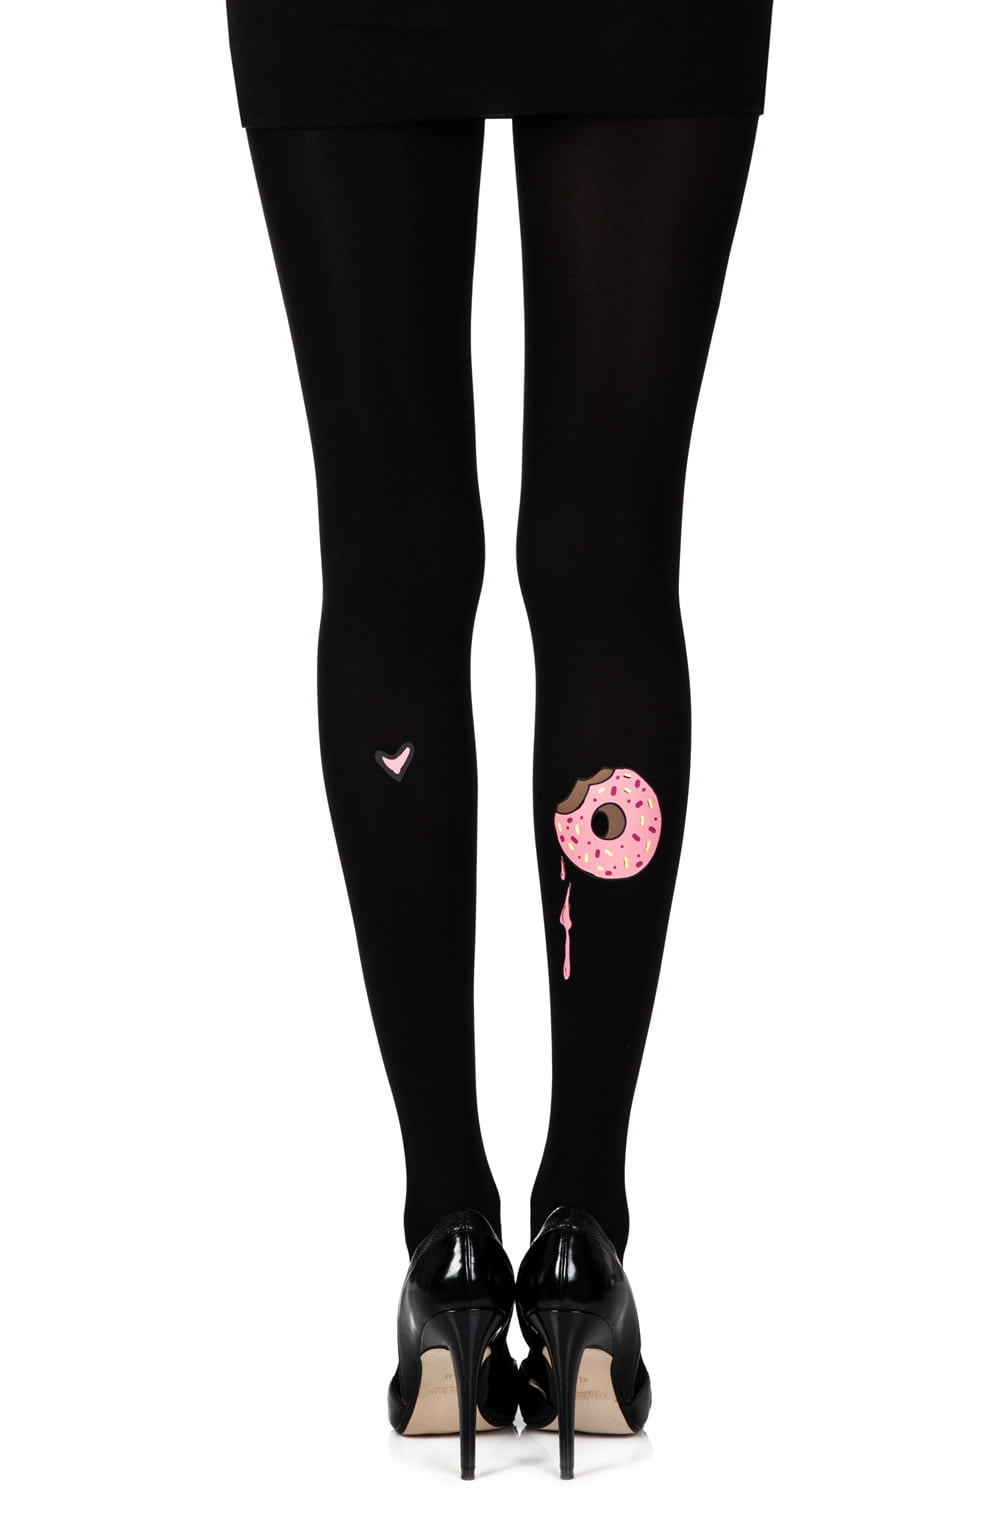 Vibrators, Sex Toy Kits and Sex Toys at Cloud9Adults - Zohara "A Donut Bite" Black Print Tights - Buy Sex Toys Online